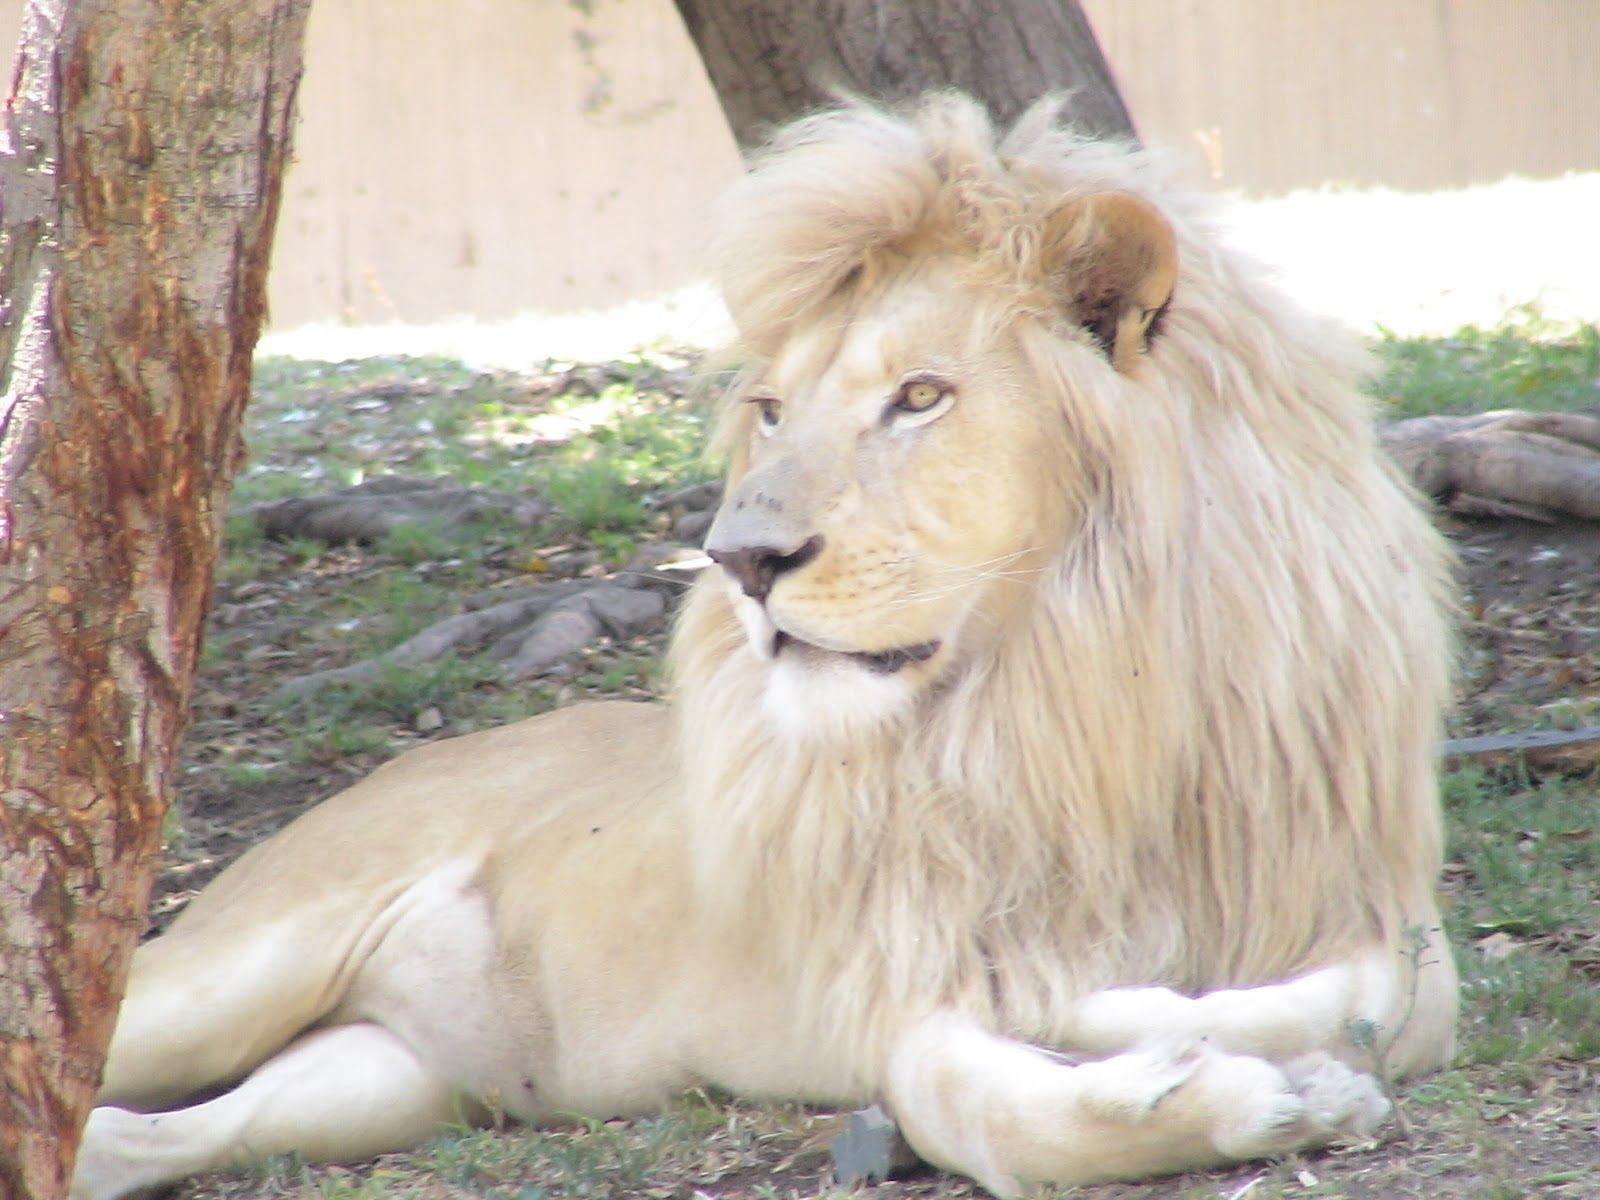 White Lion In South Africa - HD Wallpaper 